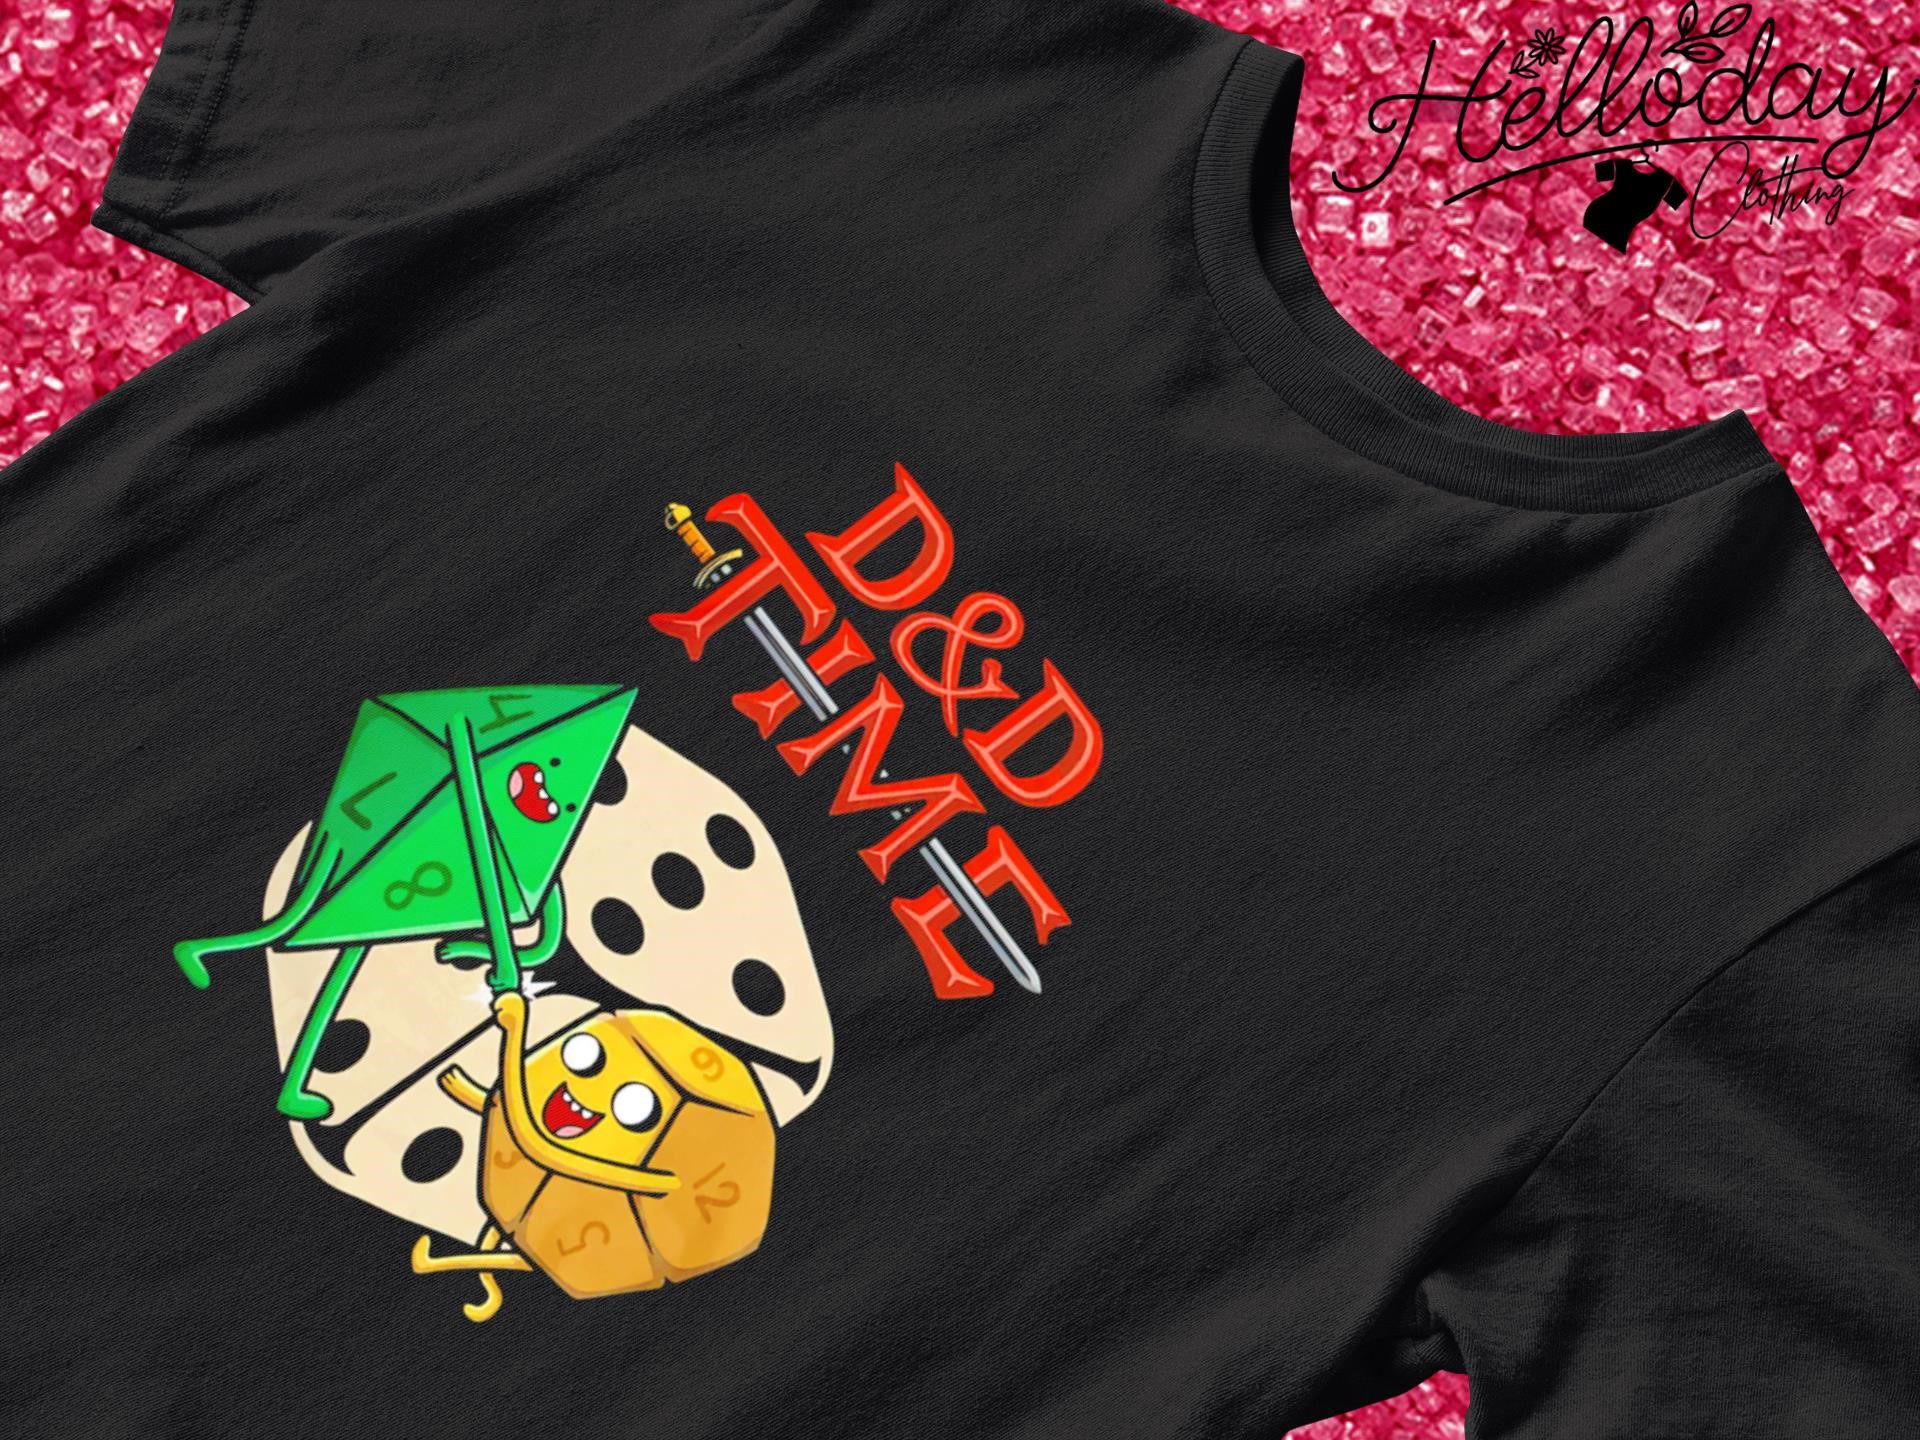 D&D Time Dungeons and Dragons shirt